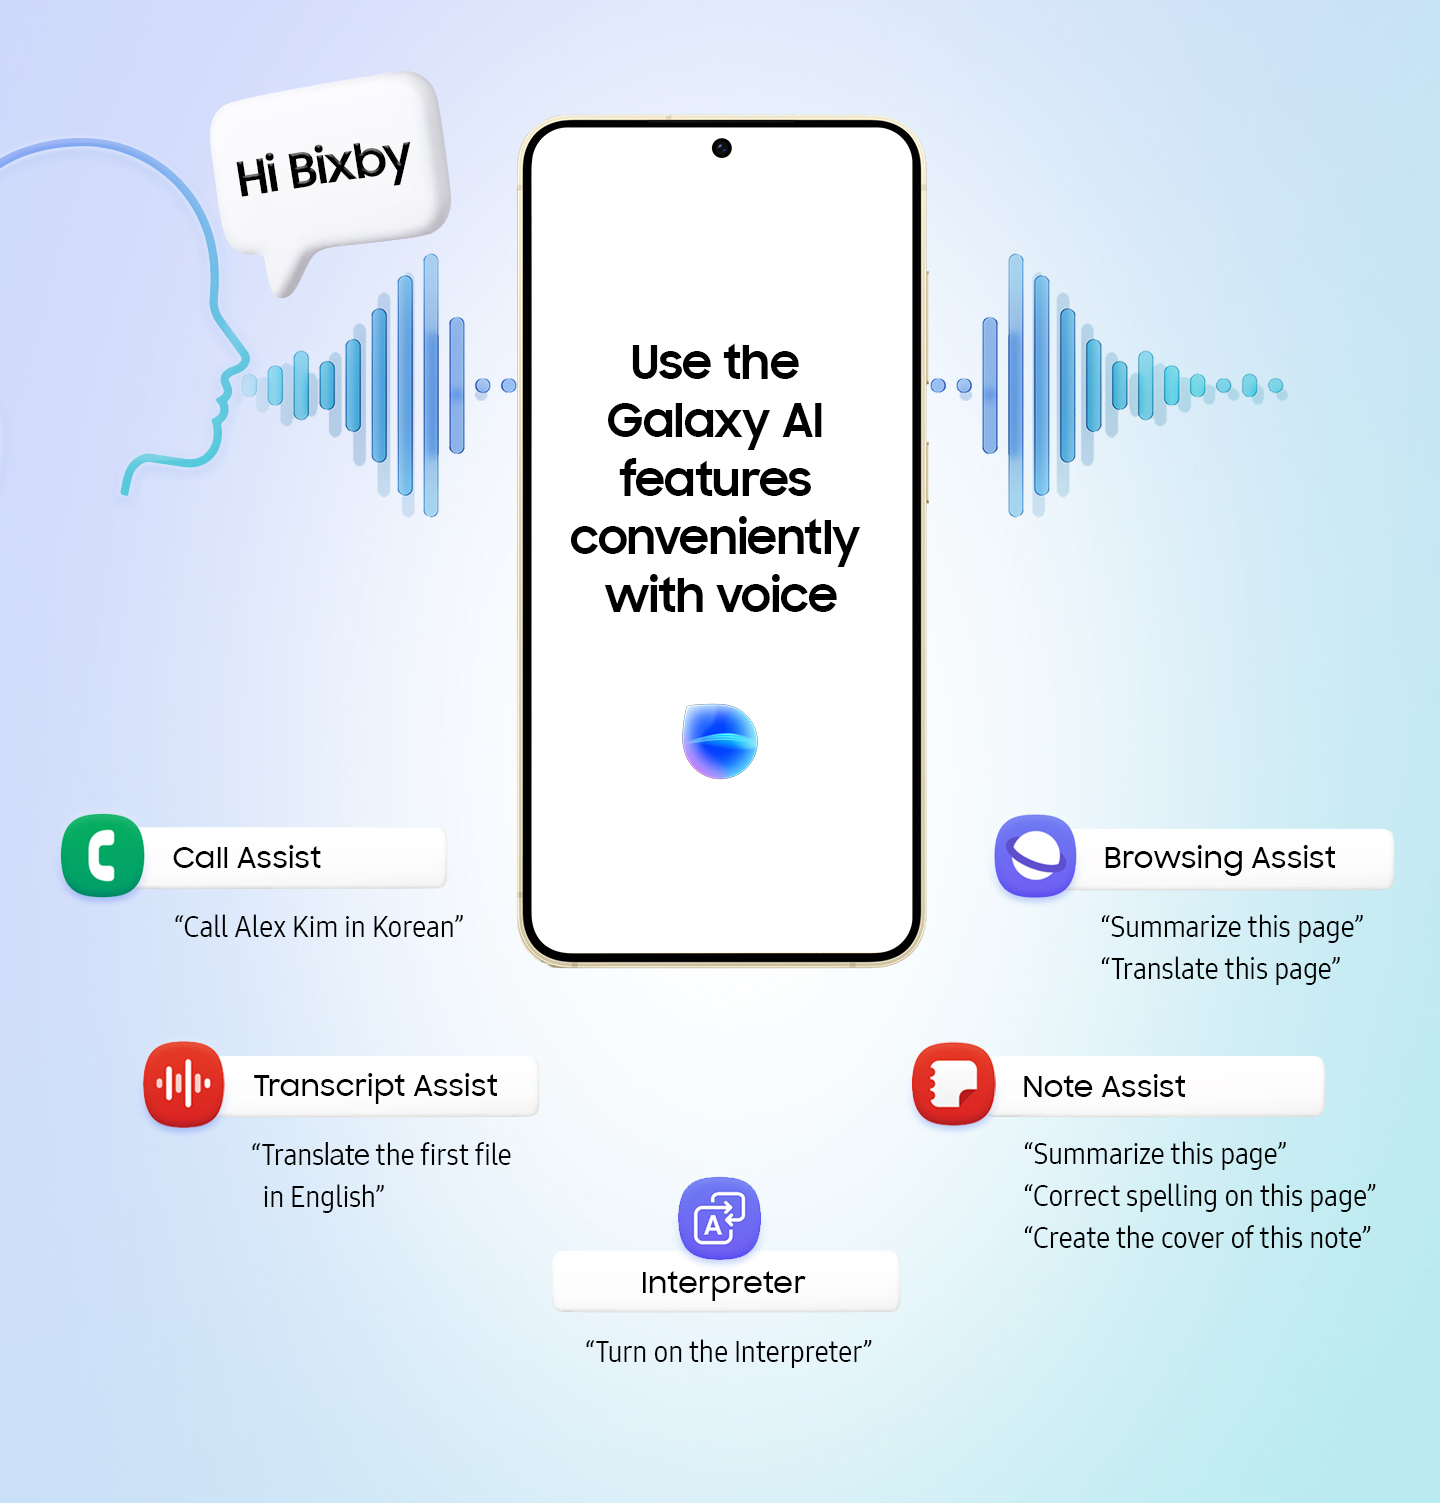 Galaxy-AI-is-now-Integrated-with-Bixby-infographic.jpg